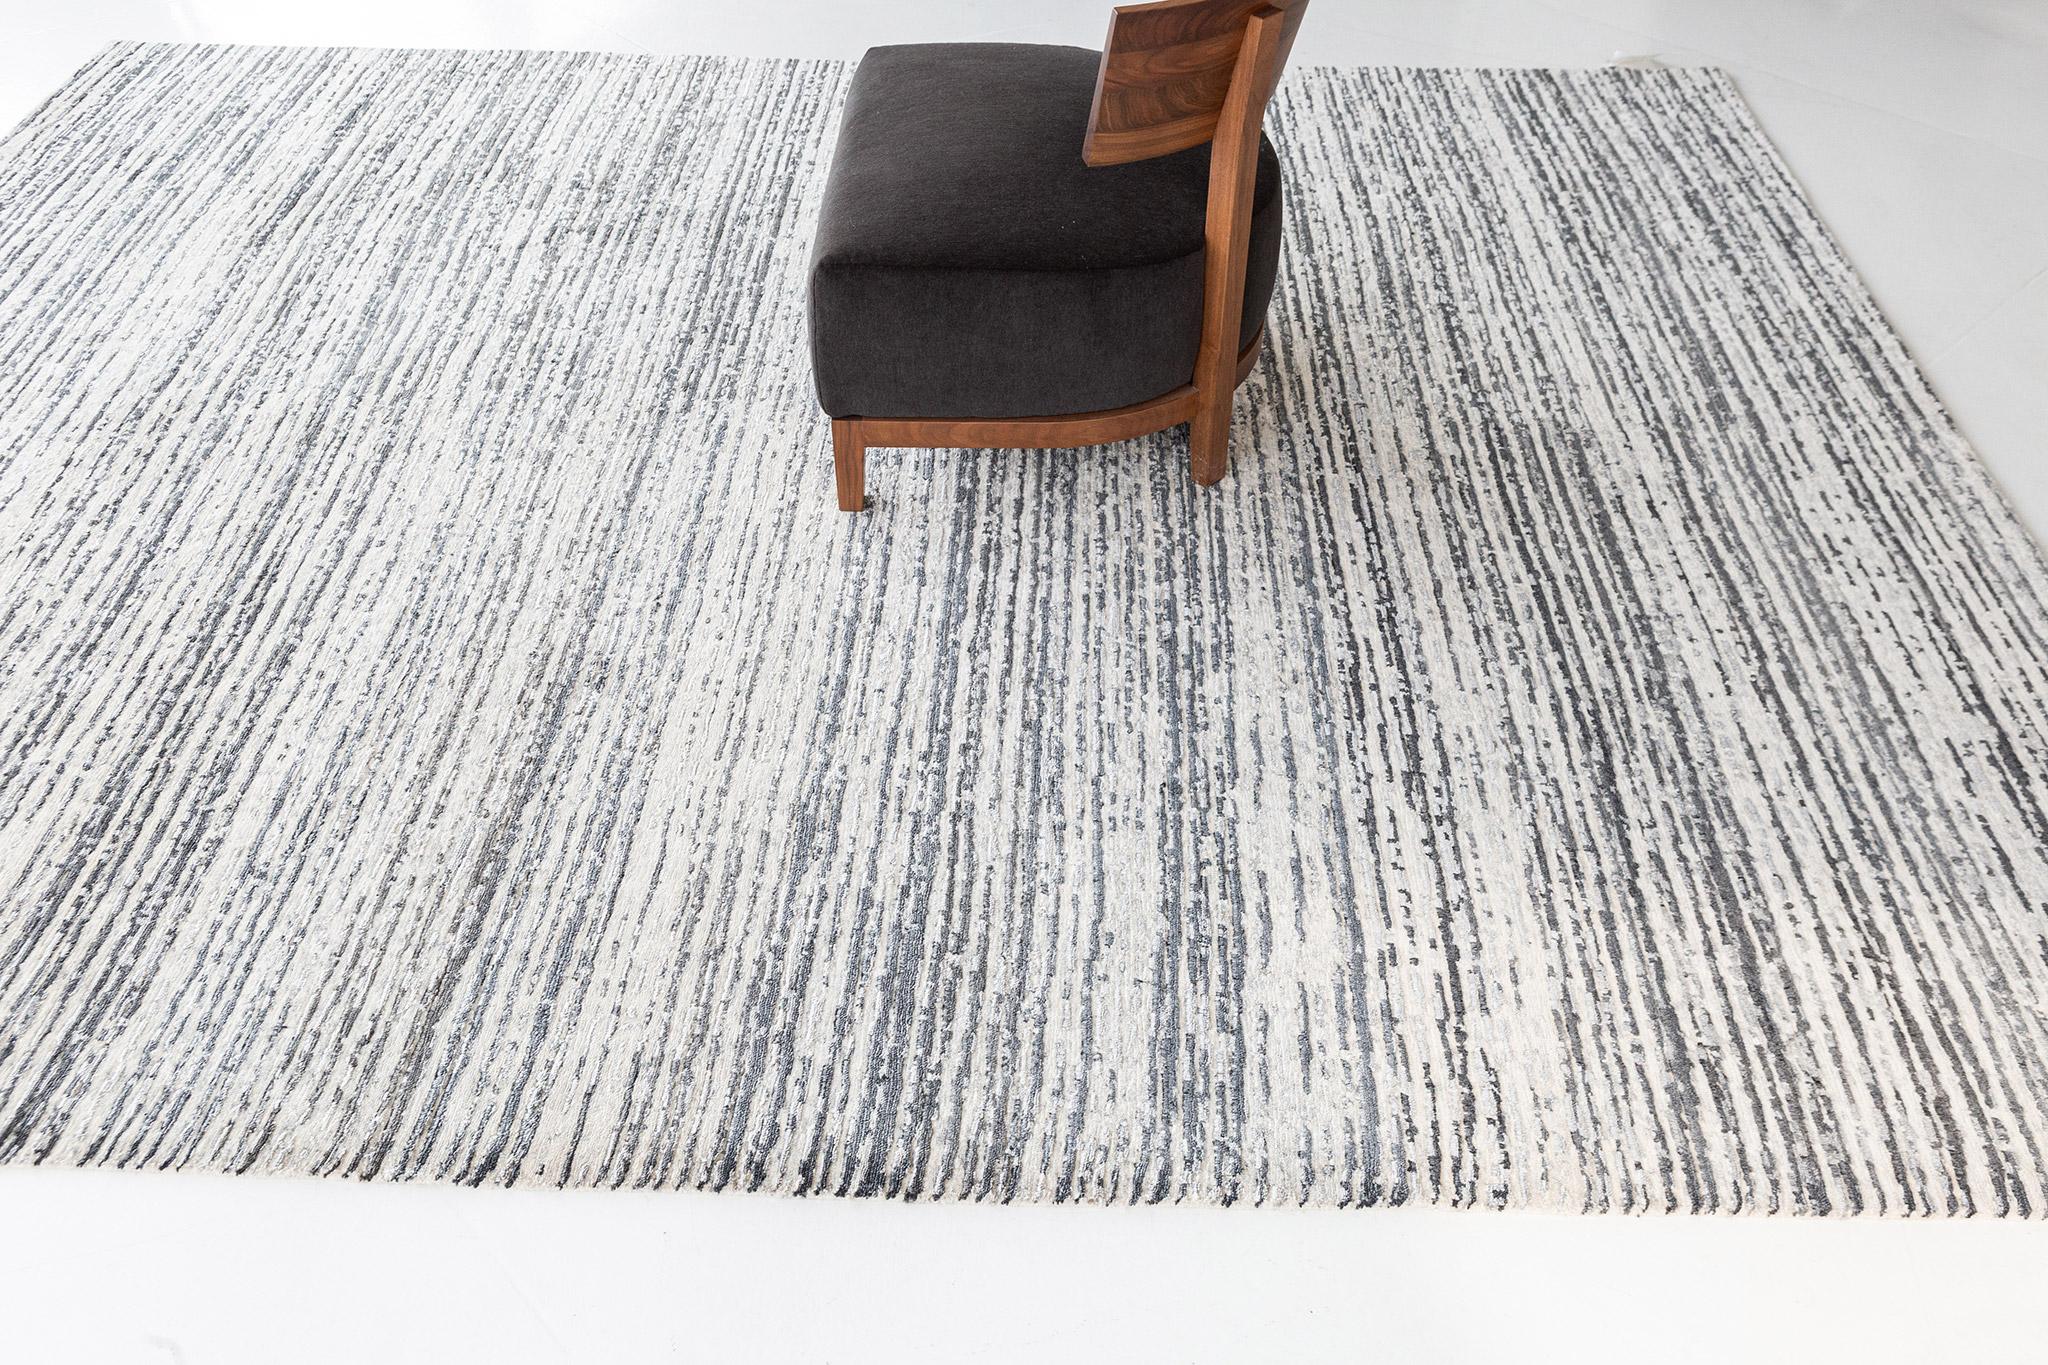 This wool and cotton rug in a horizontal stroke pattern over a contrast of jet and white. A contemporary and minimalist interior is a match for your modern room spaces. A centerpiece that will amaze your guests.

Rug Number
26844
Size
8' 0